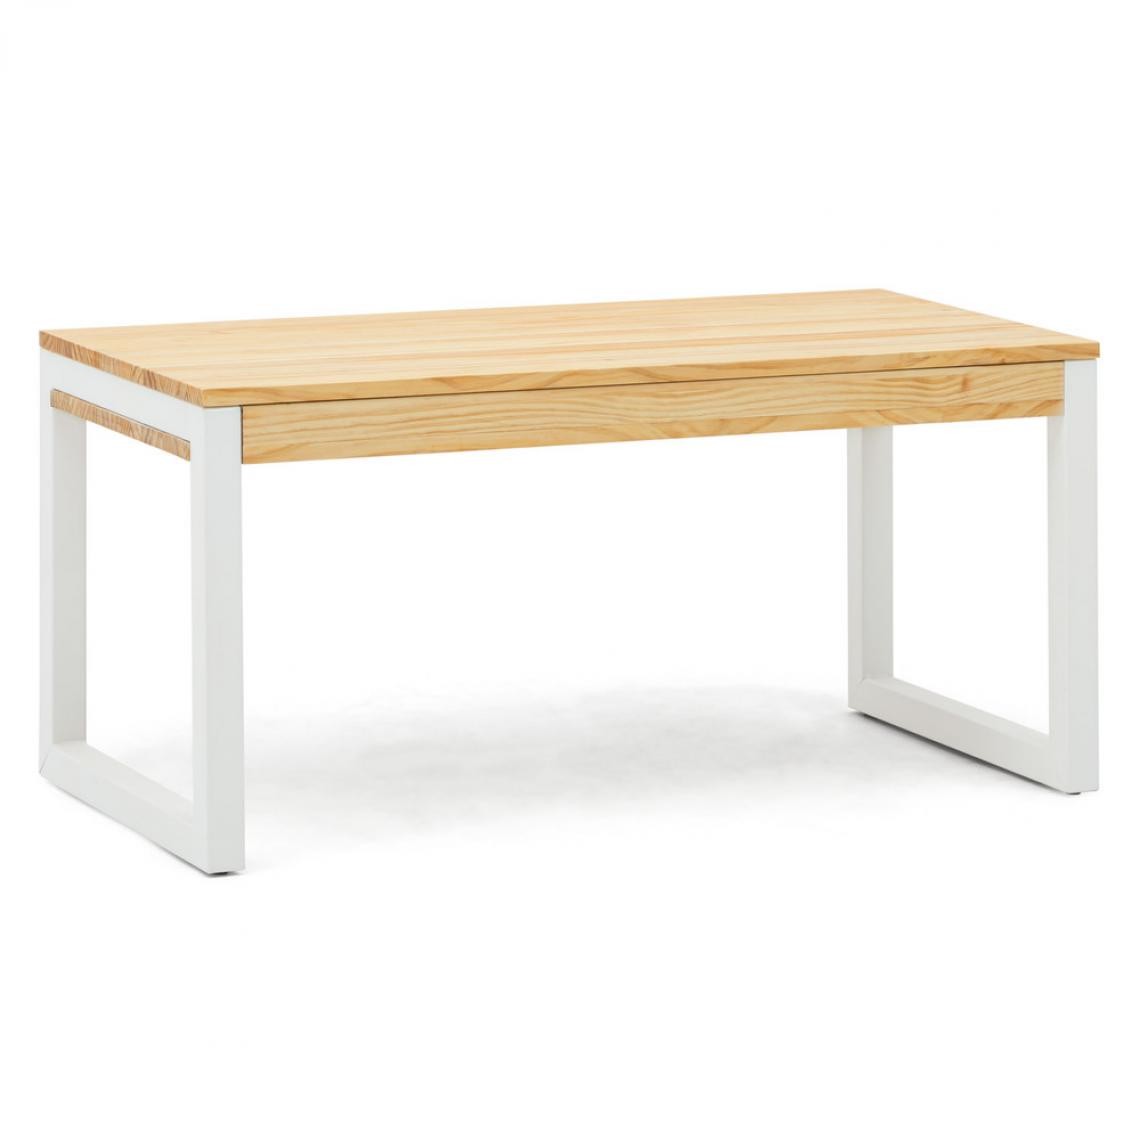 BOX FURNITURE - Table basse relevable iCub Strong ECO 50x120x52 cm 18mm Blanc Naturel - Box Furniture - Tables basses